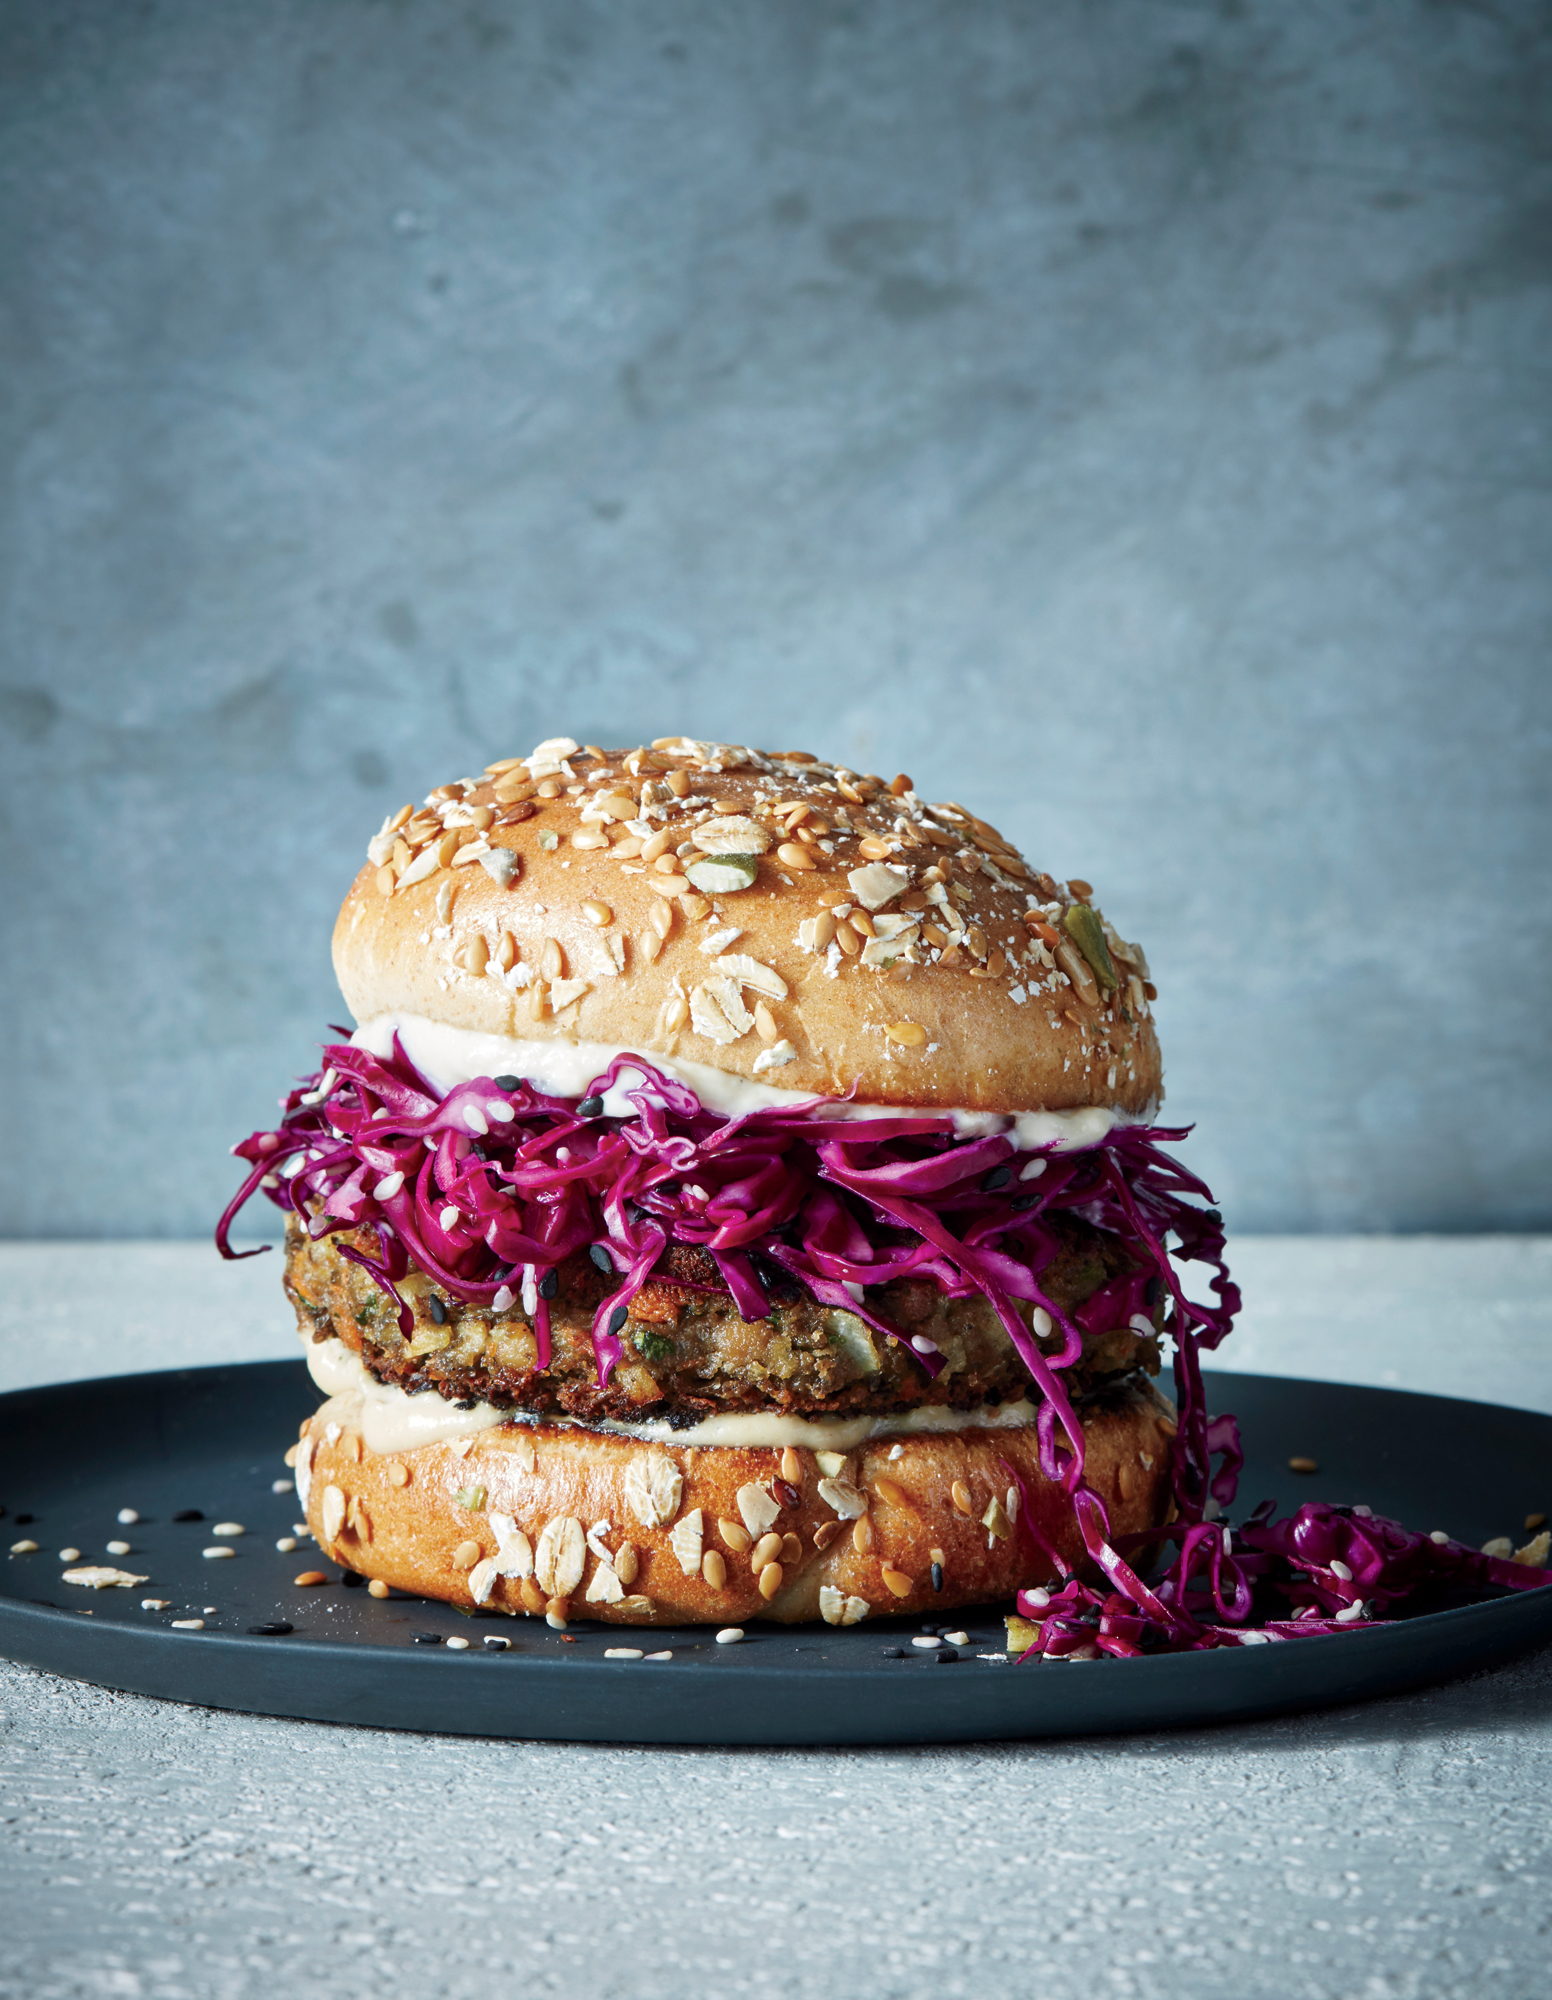 Lentil-Tahini Burgers with Pickled Cabbage